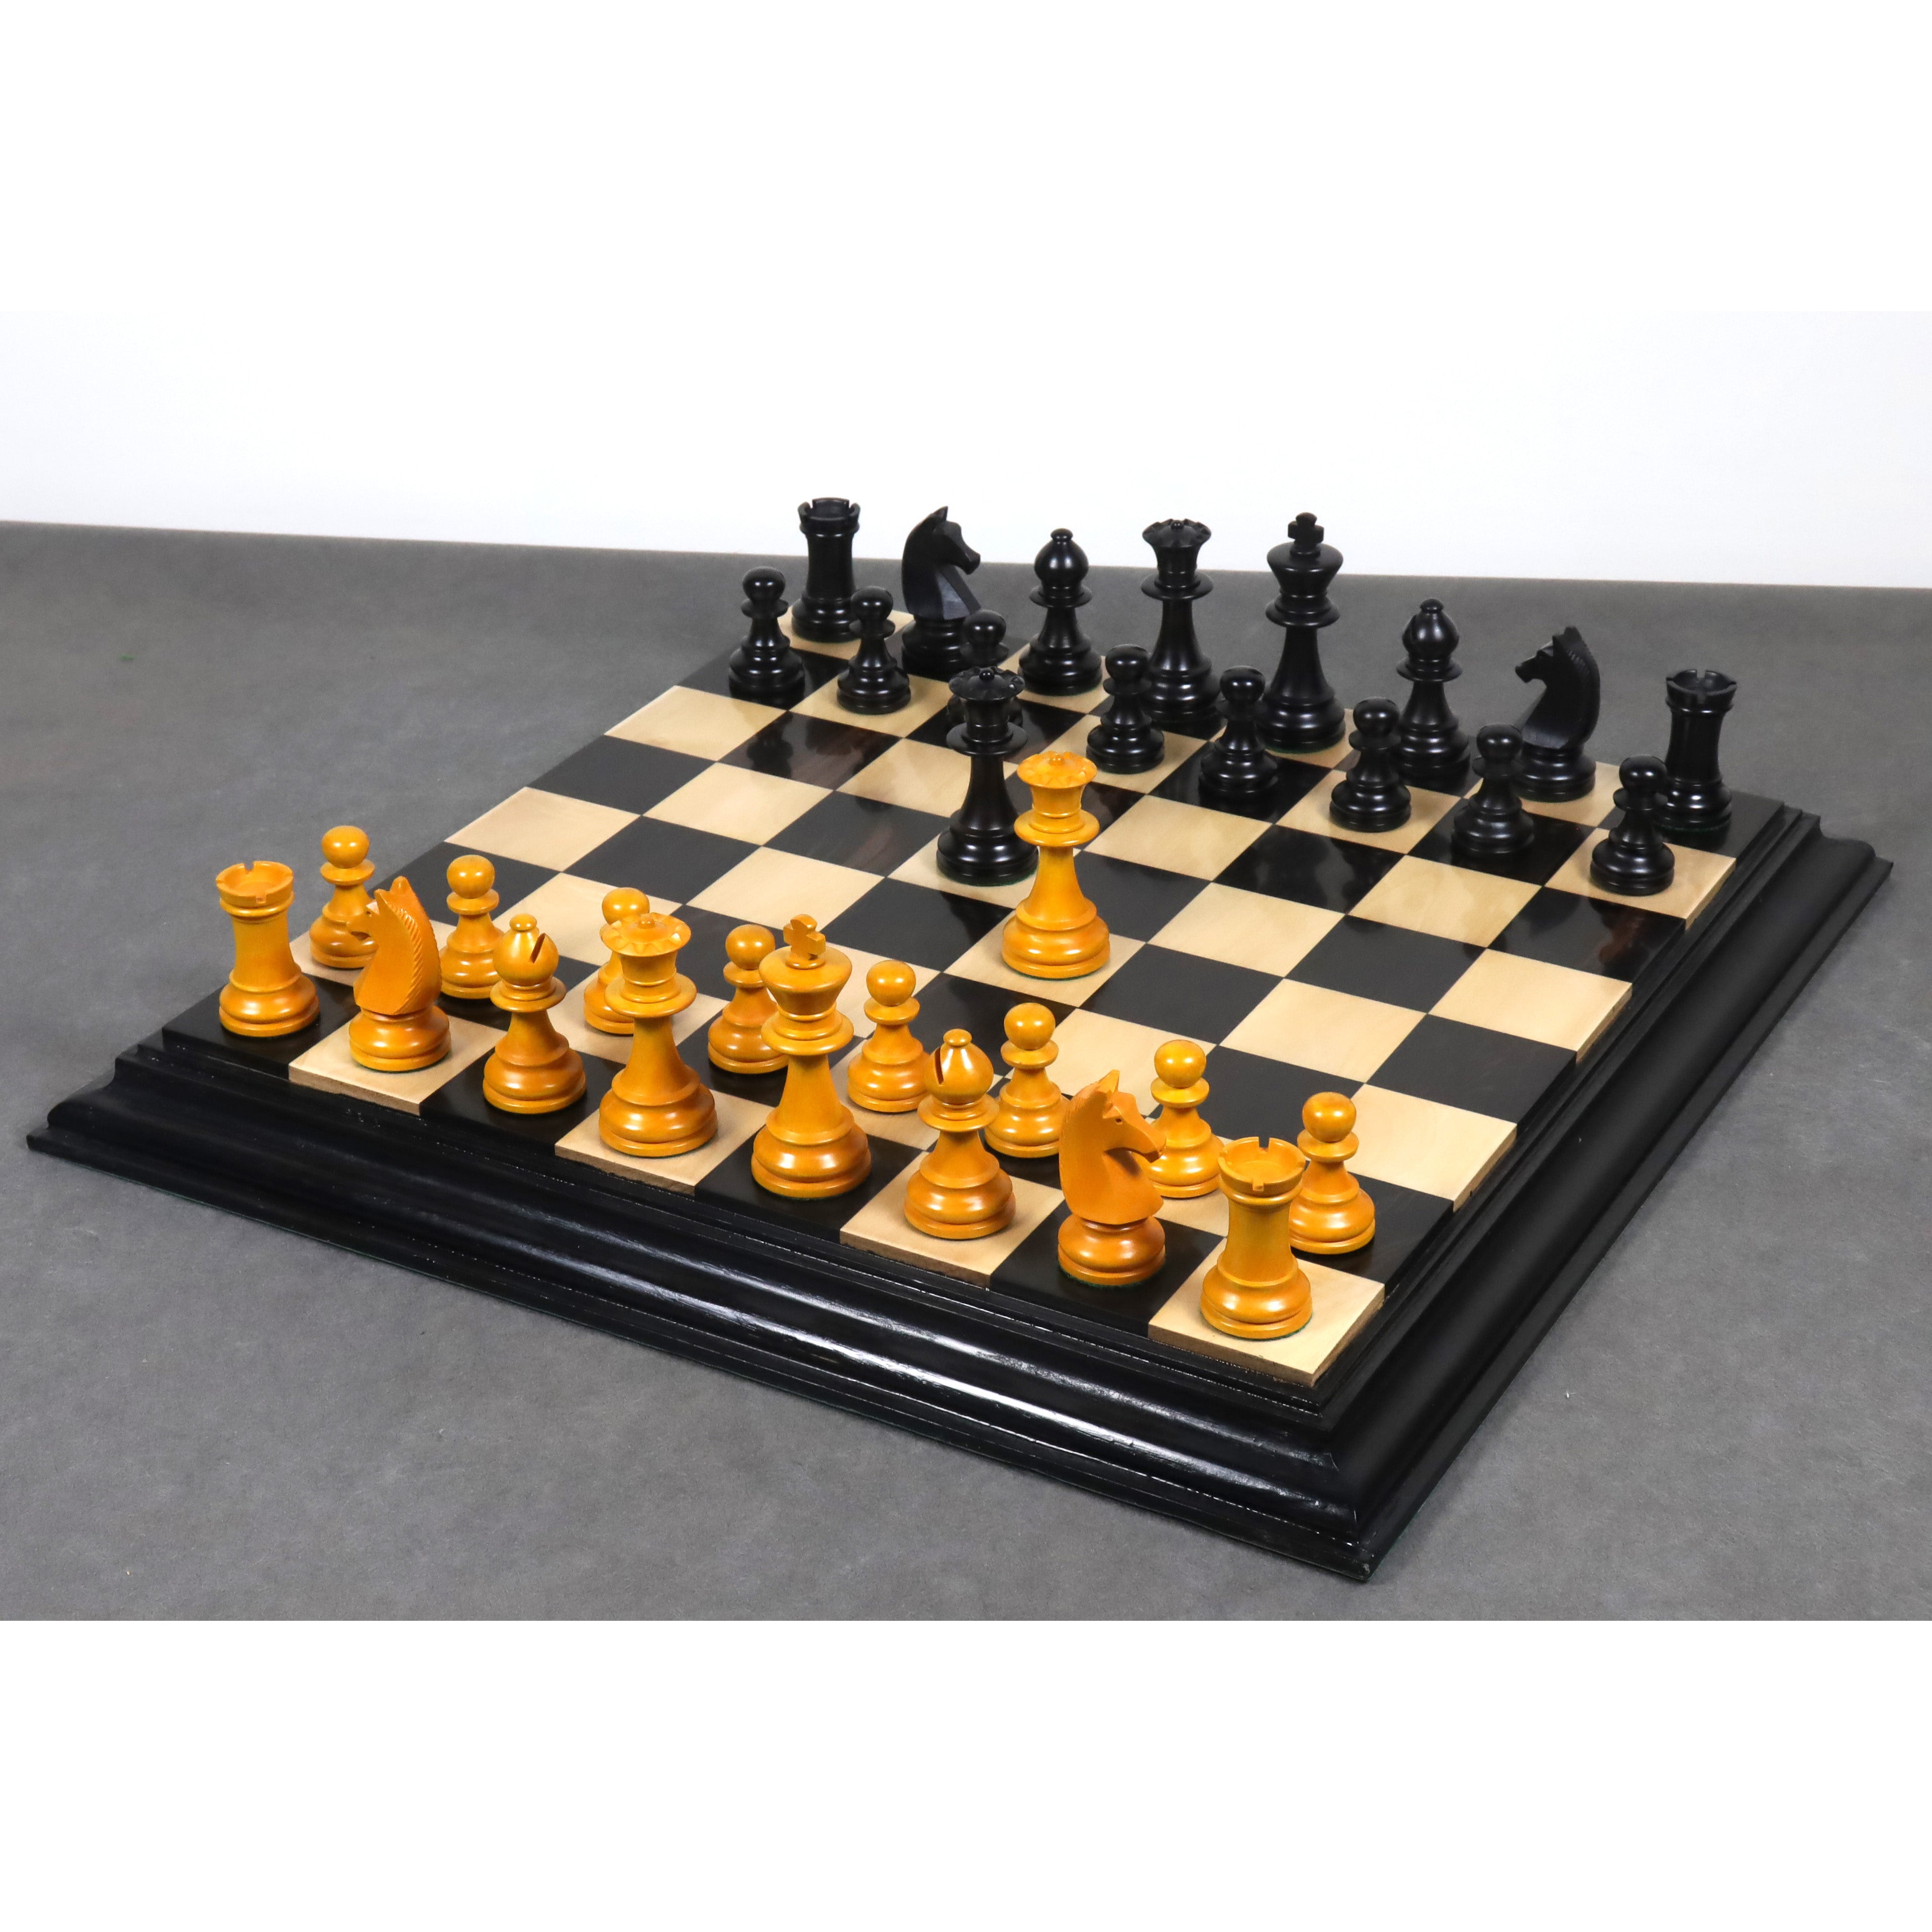 the black chess pieces in French